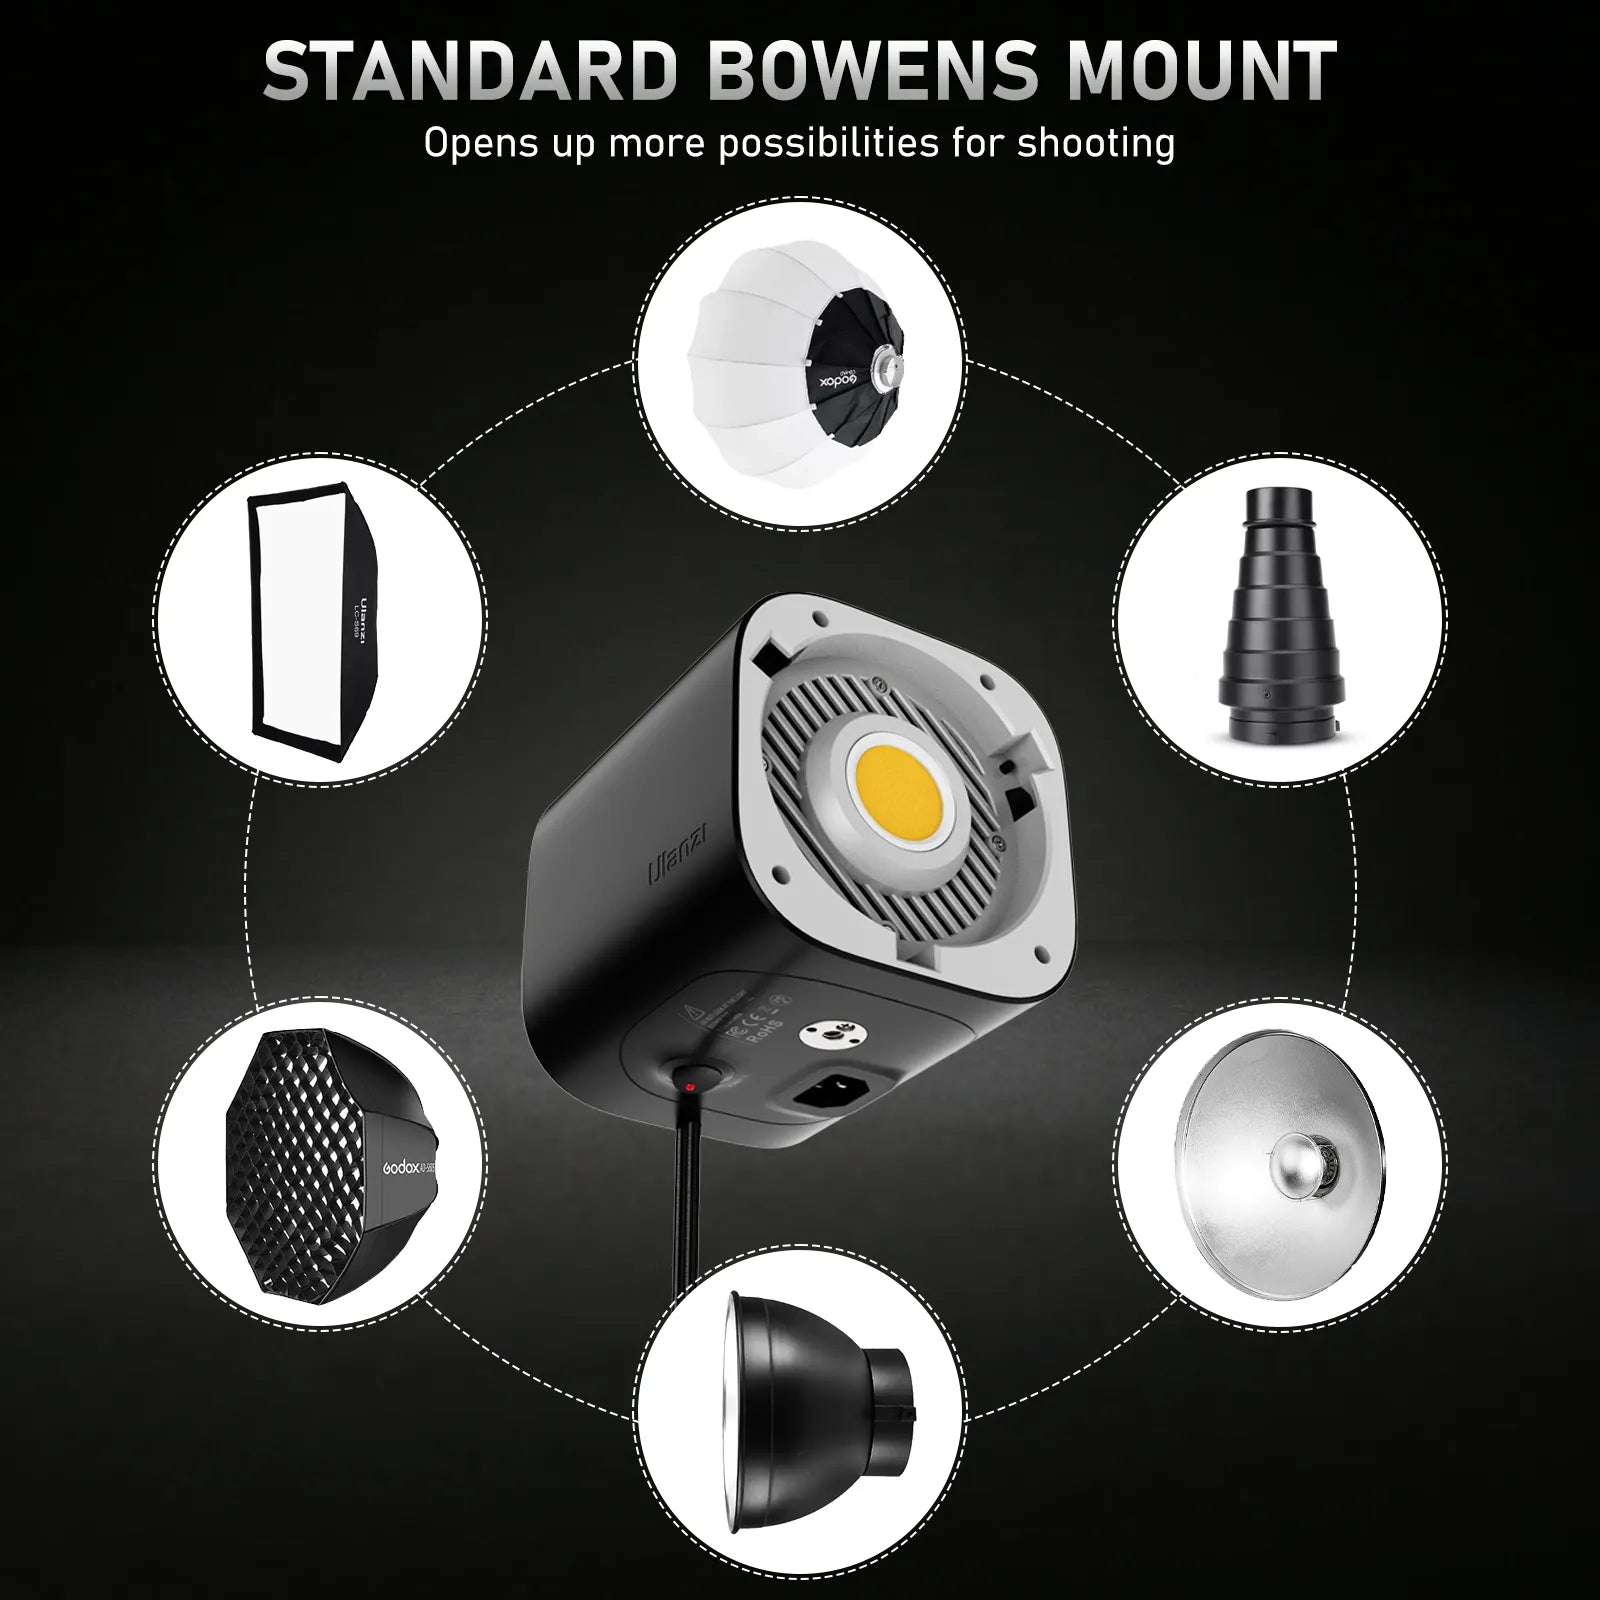 Universal Bowens Mount with Secure Lock